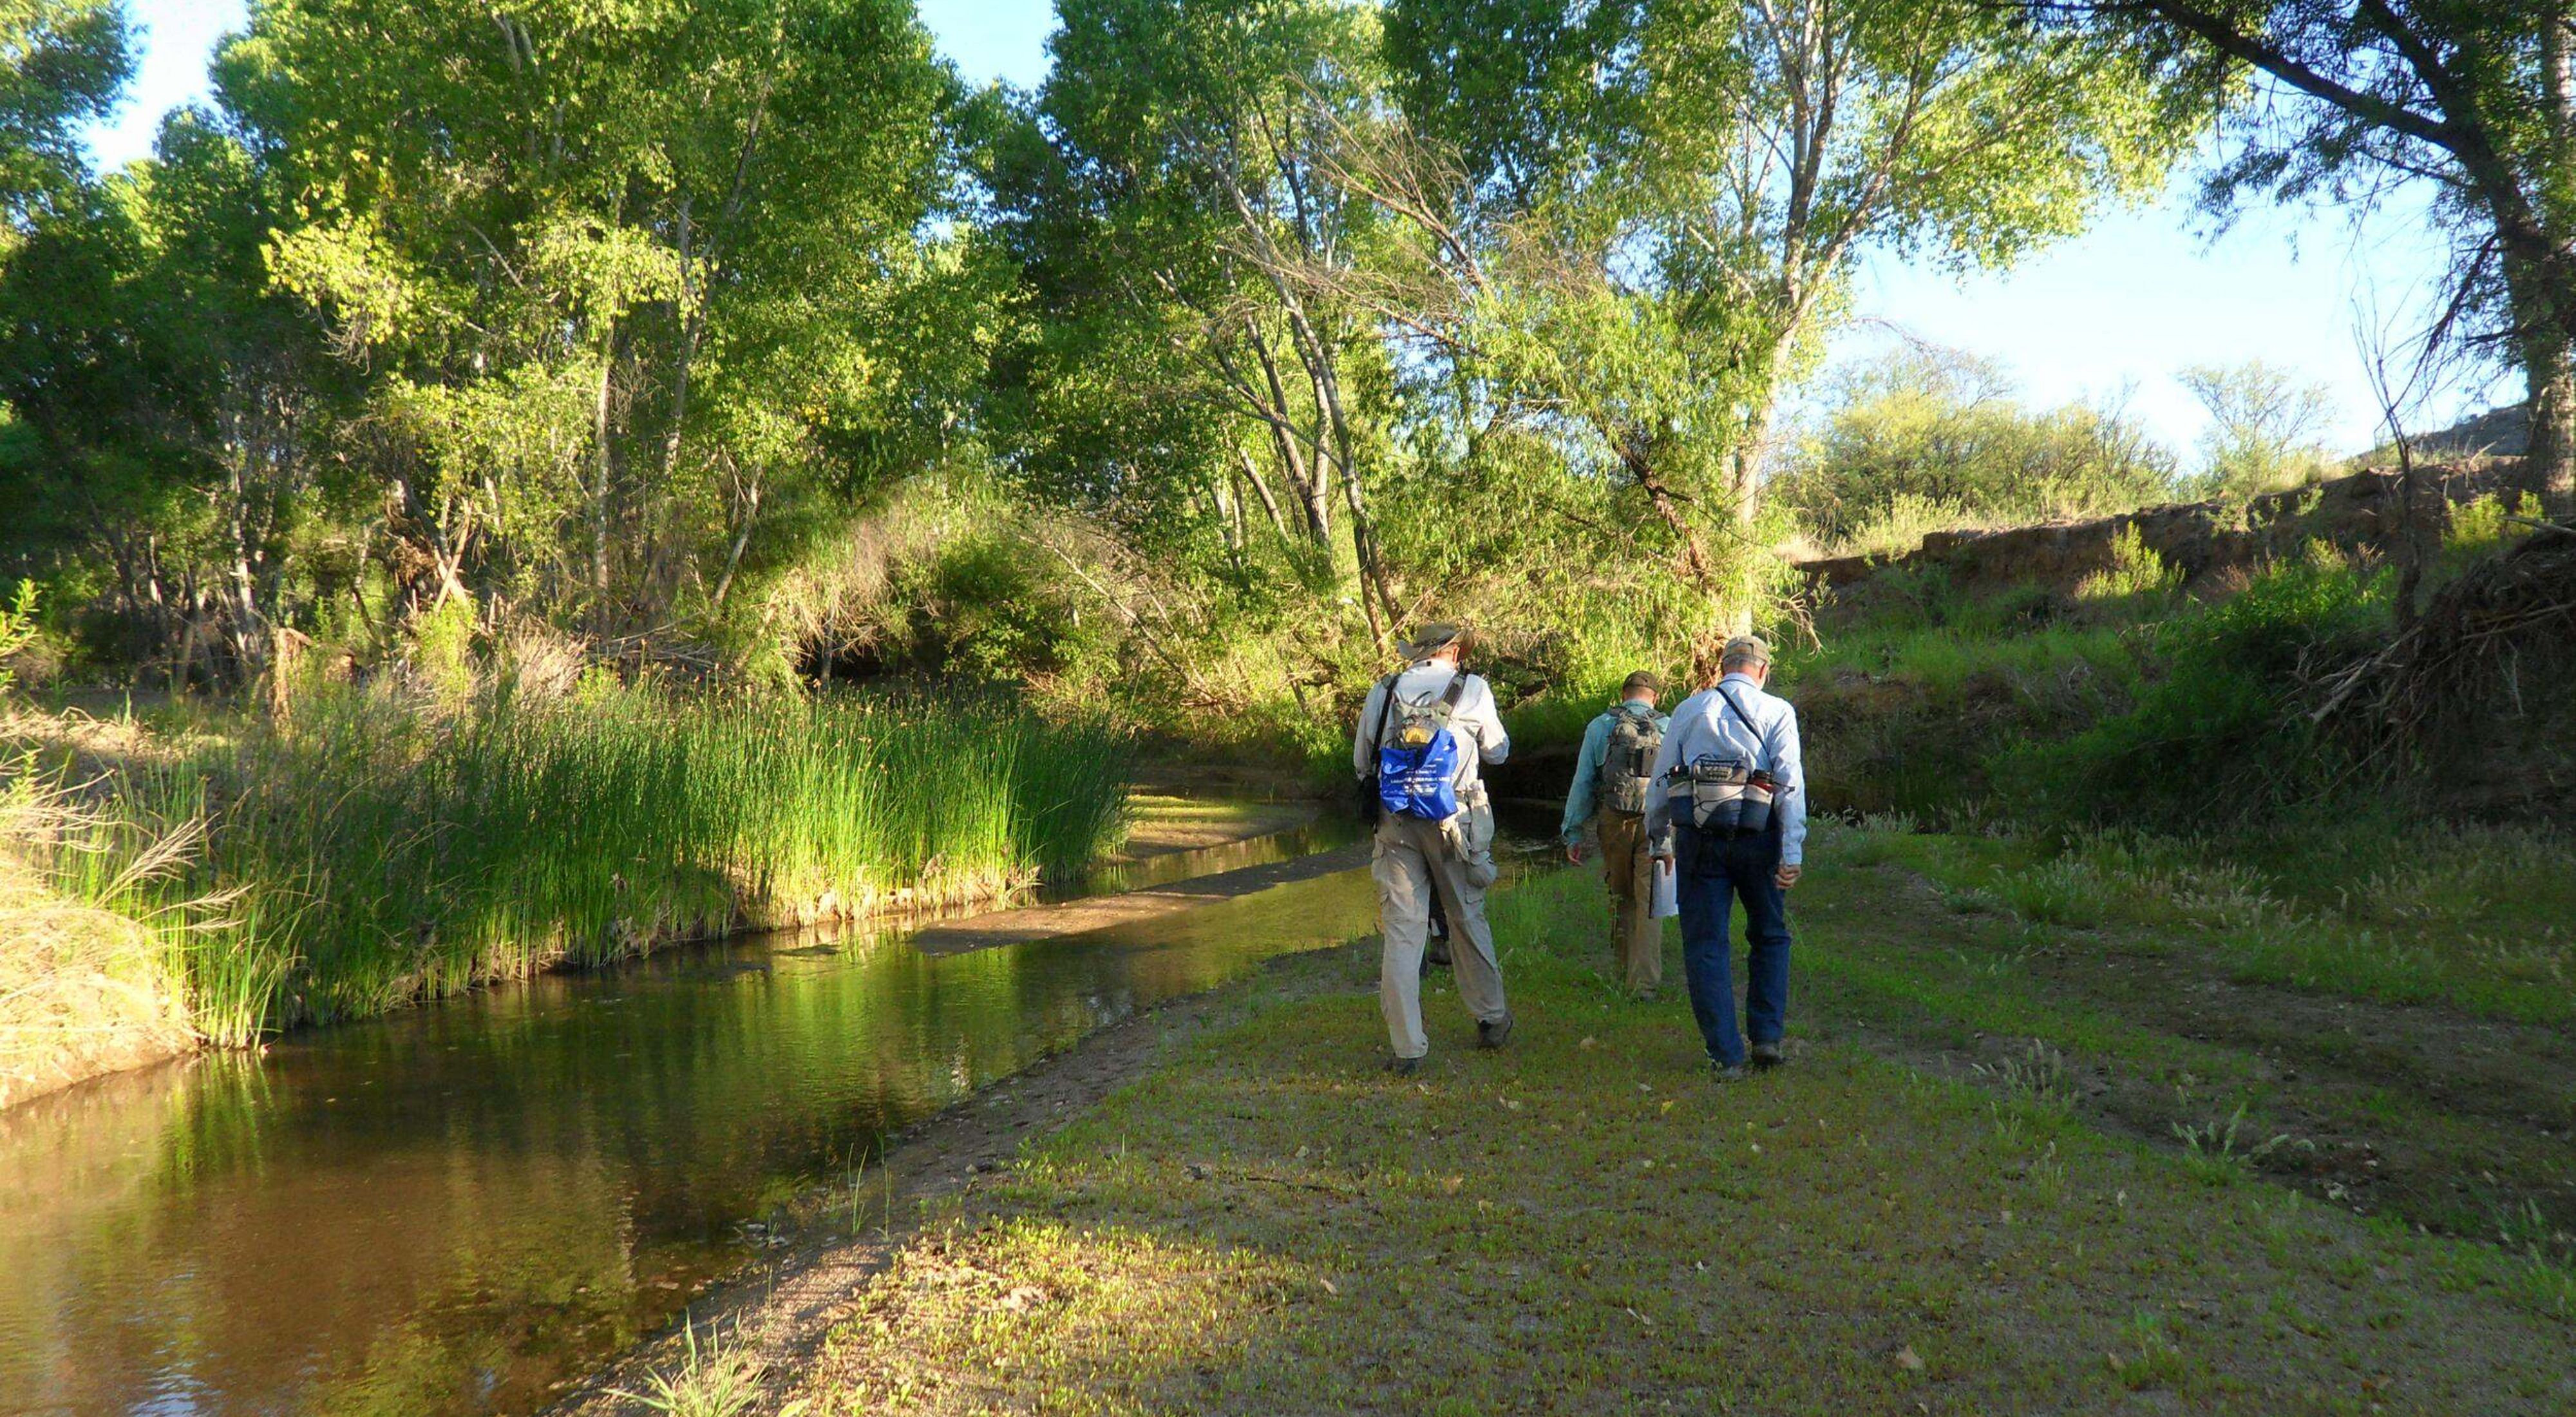 Three individuals with mapping gear walk away from the camera, along a stream of water to their right.